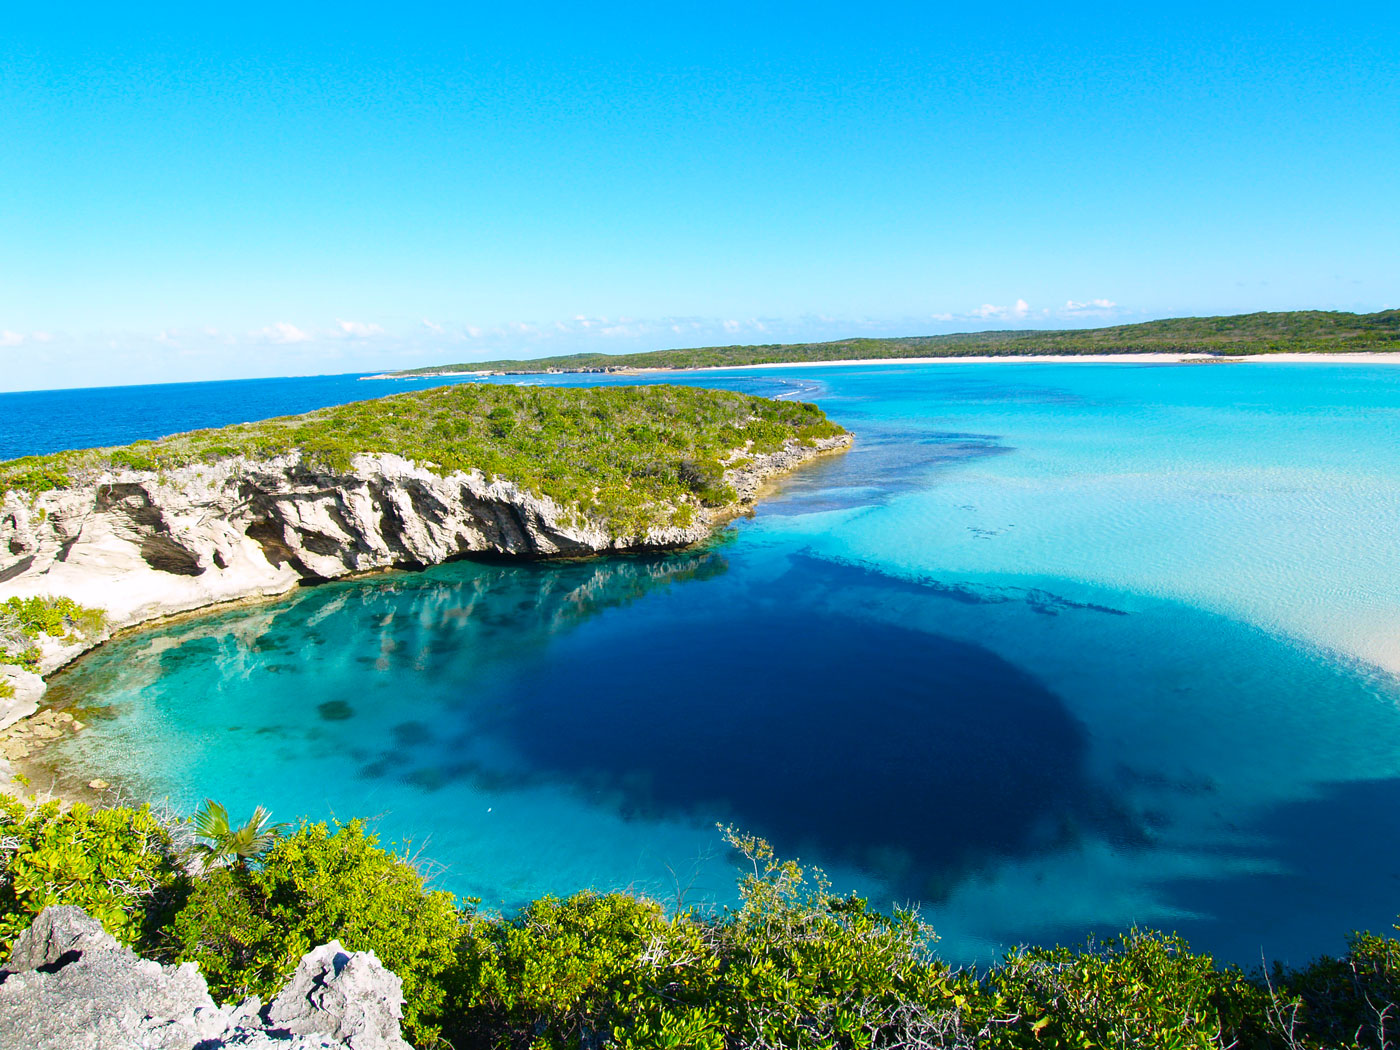 The Blue Hole in the Bahamas